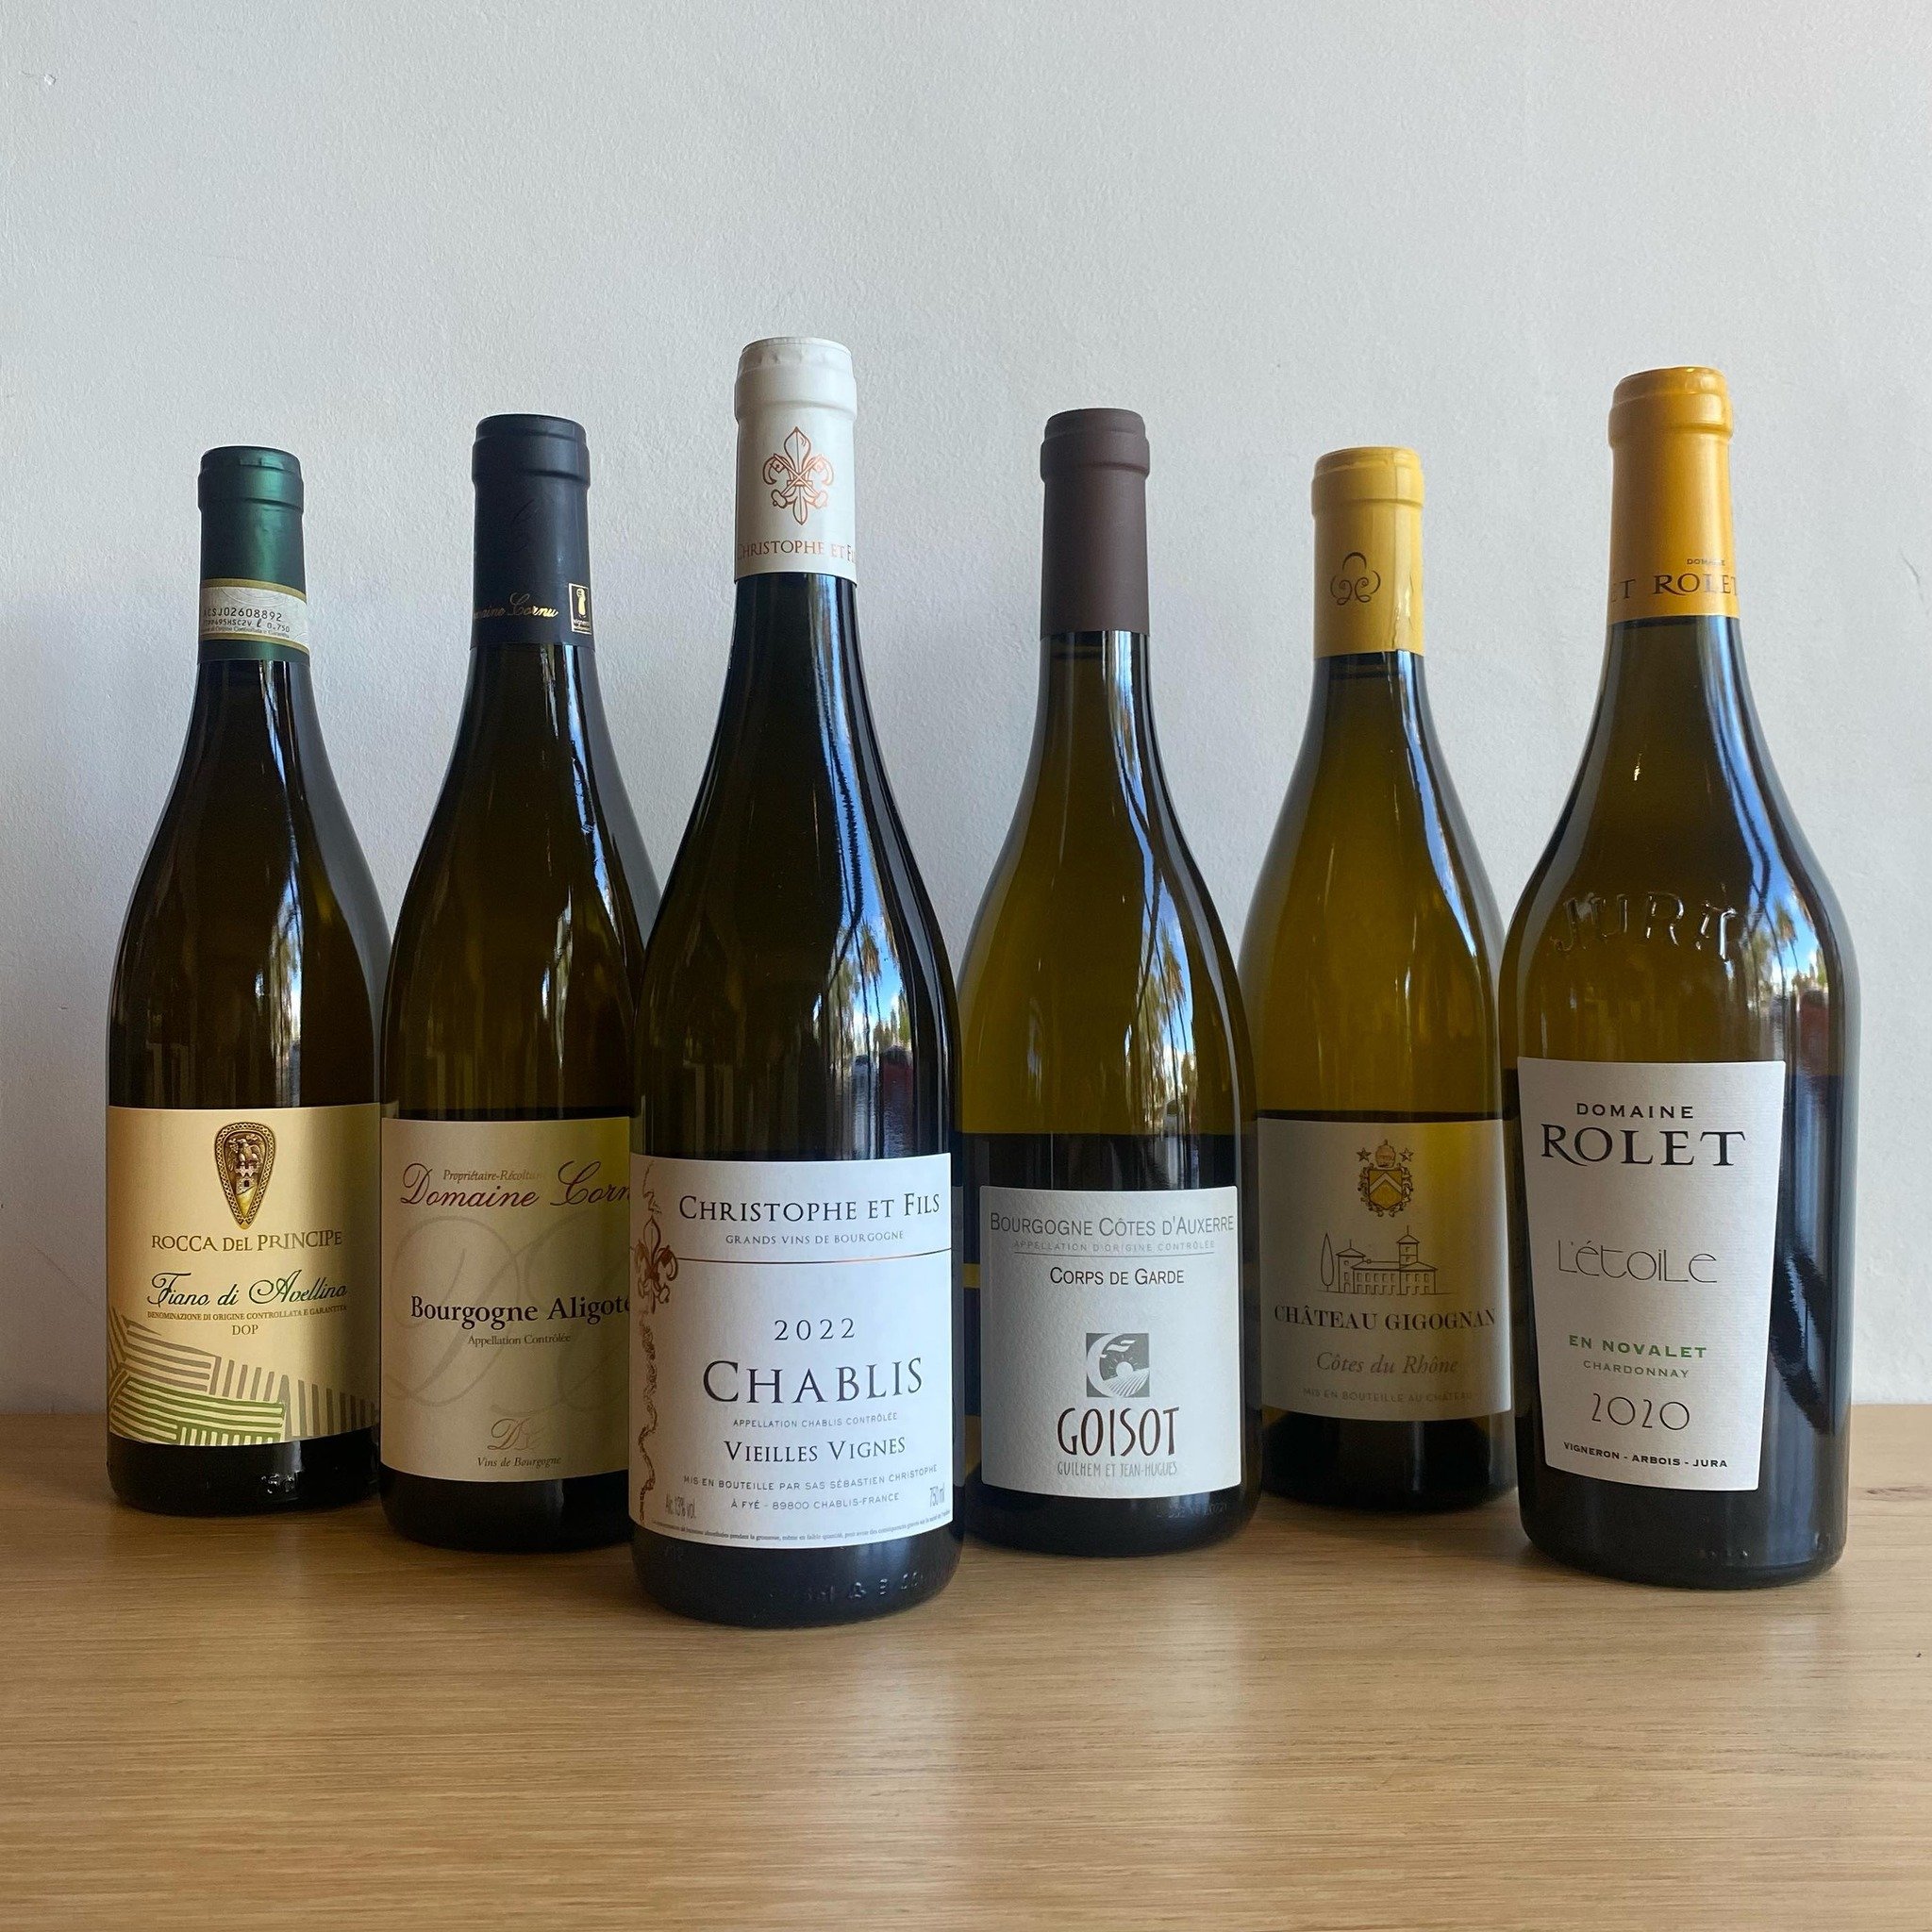 The sun is shining today, so we&rsquo;ll take a moment to show off some new white wines we got in store this week 🌞

@roccadelprincipe 2021 Fiano do Avellino

Domaine Cornu 2021 Bourgogne Aligote

@seb_astienchristophe 2022 Vielles Vignes Chablis 

